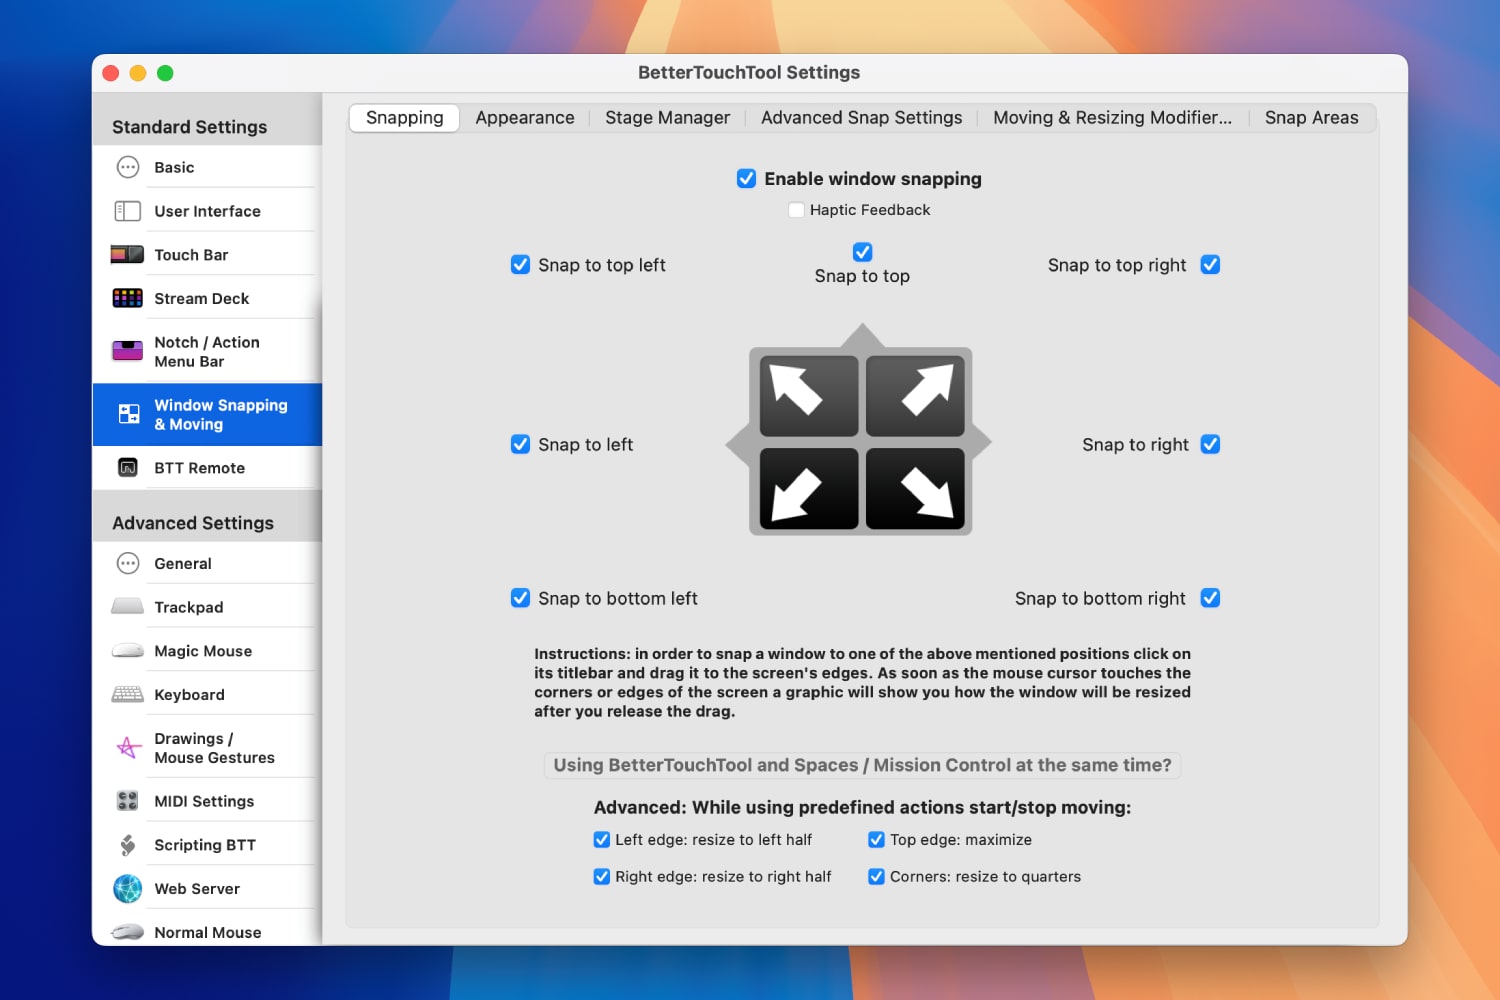 The settings page for the BetterTouchTool app, showing Window Snapping & Moving options.